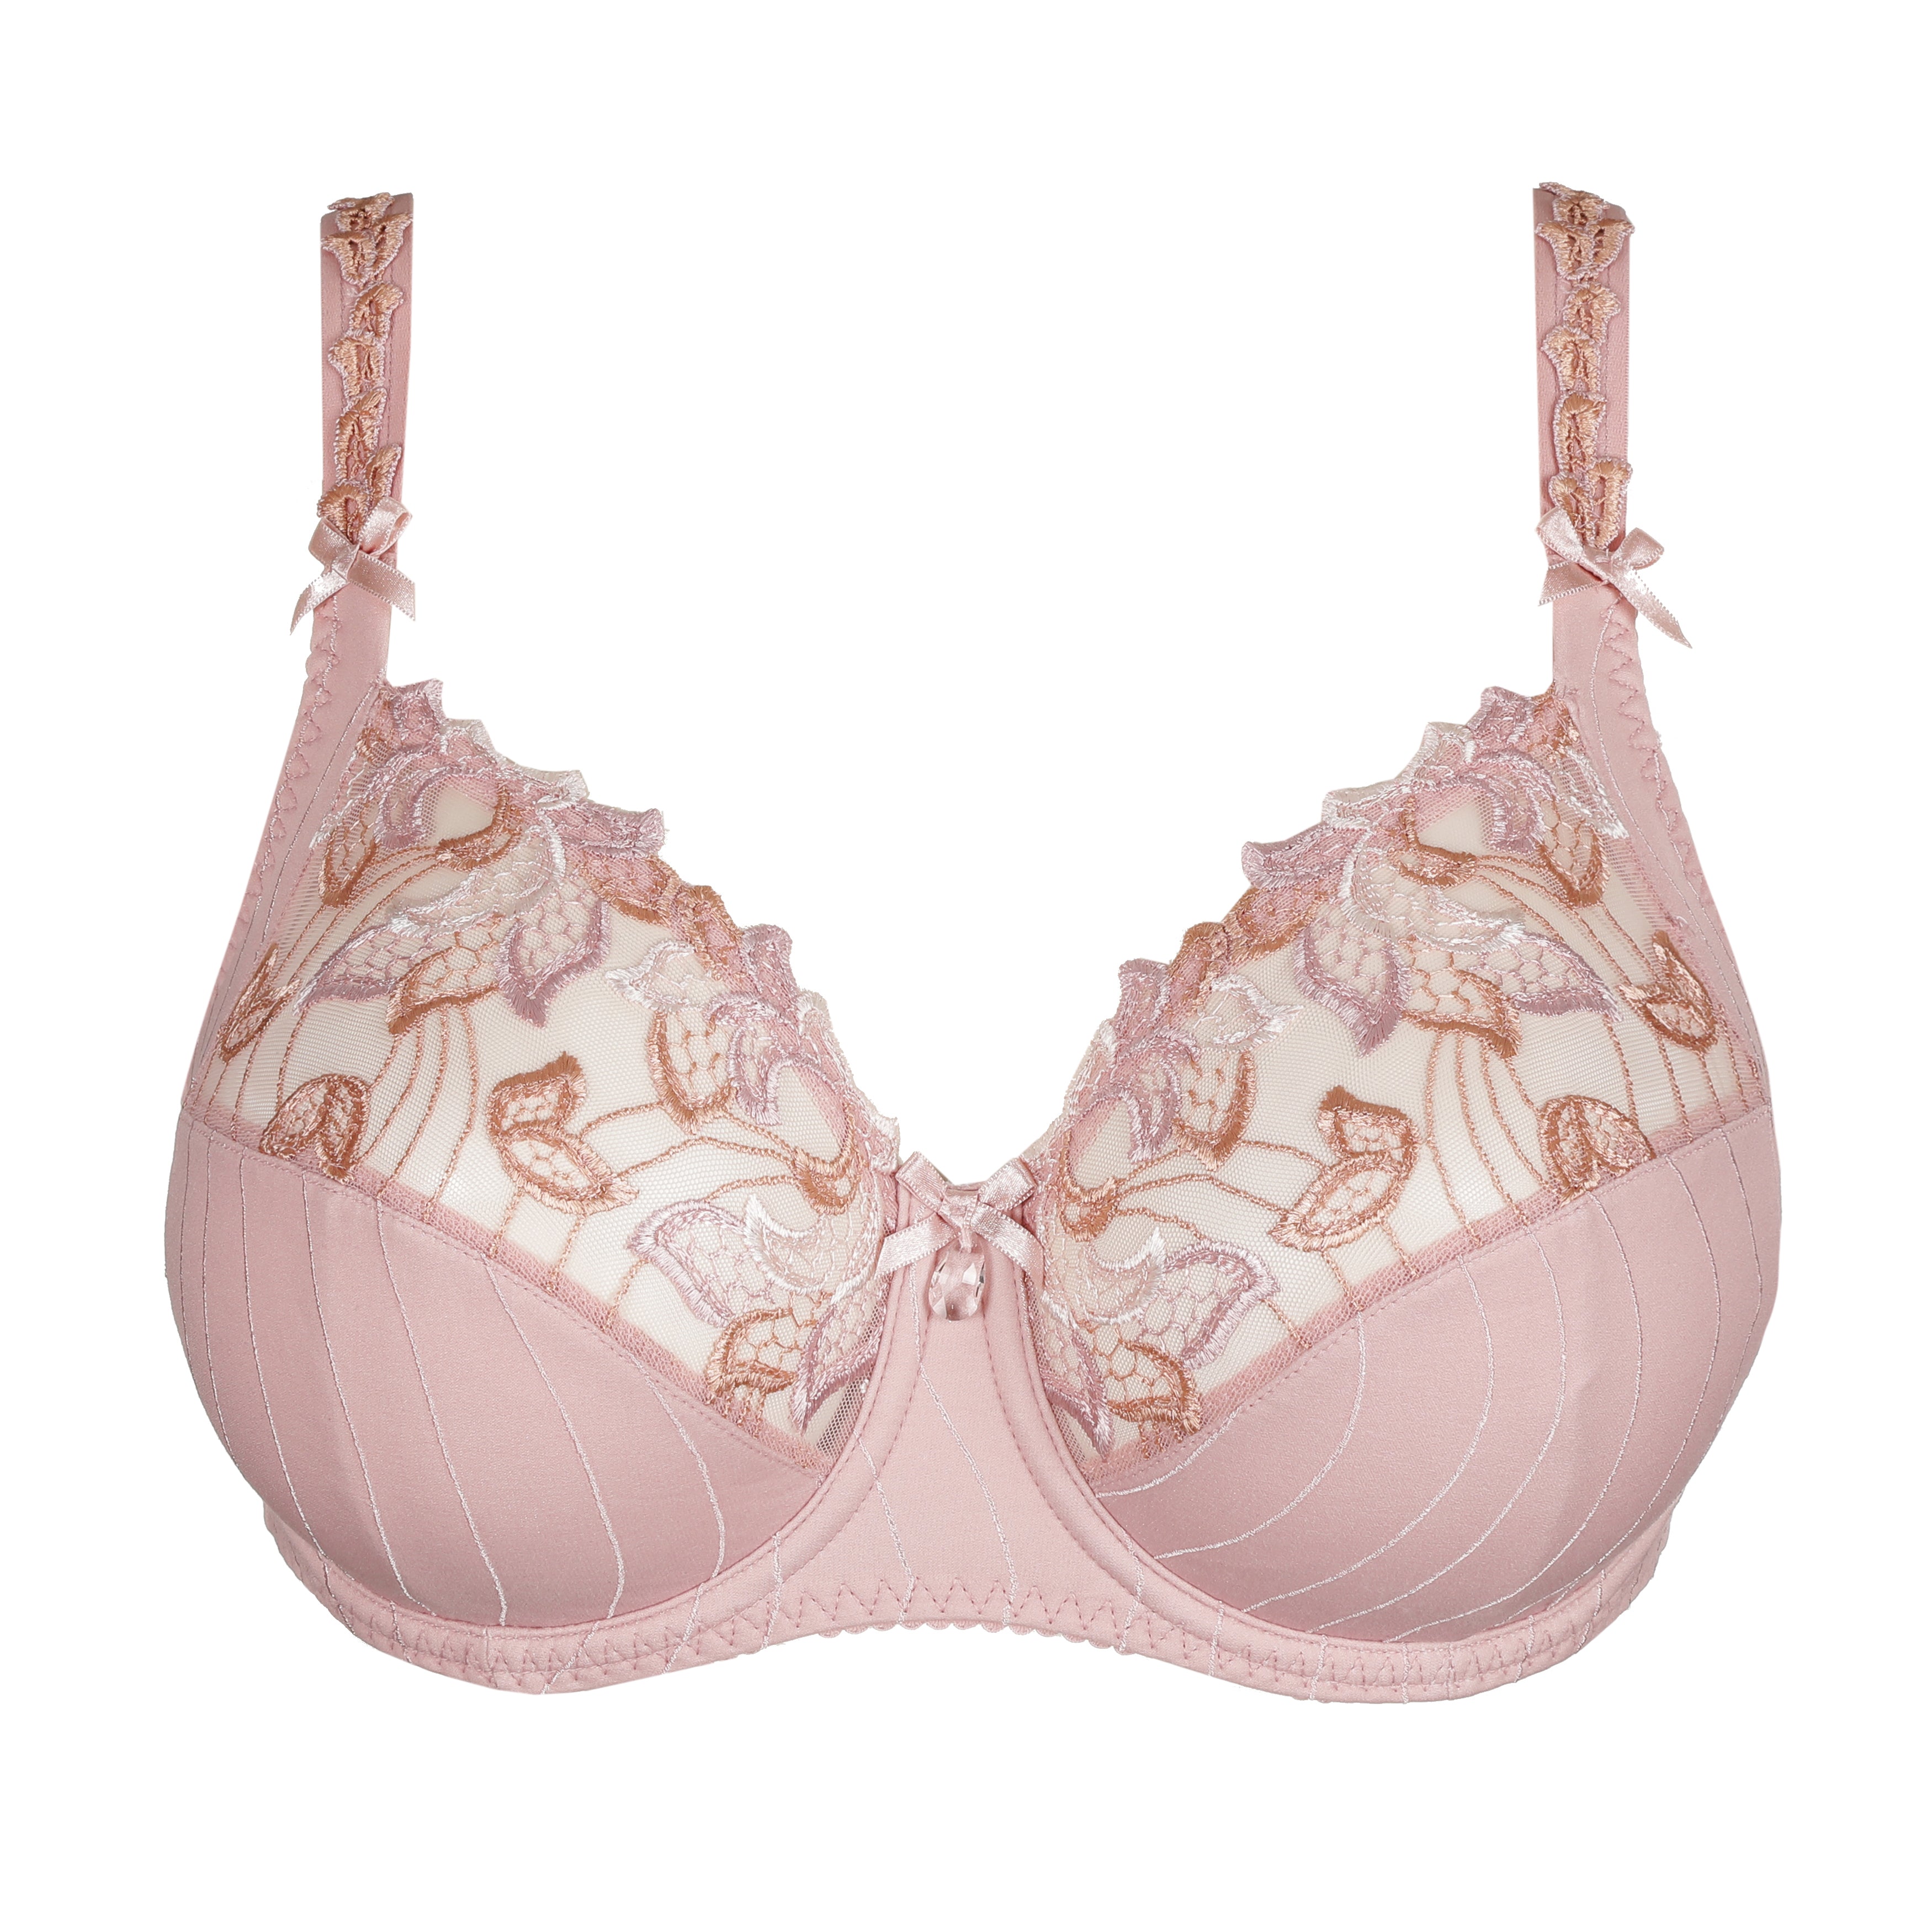 Prima Donna Deauville Full Cup Bra - Vintage Pink (Limited Edition